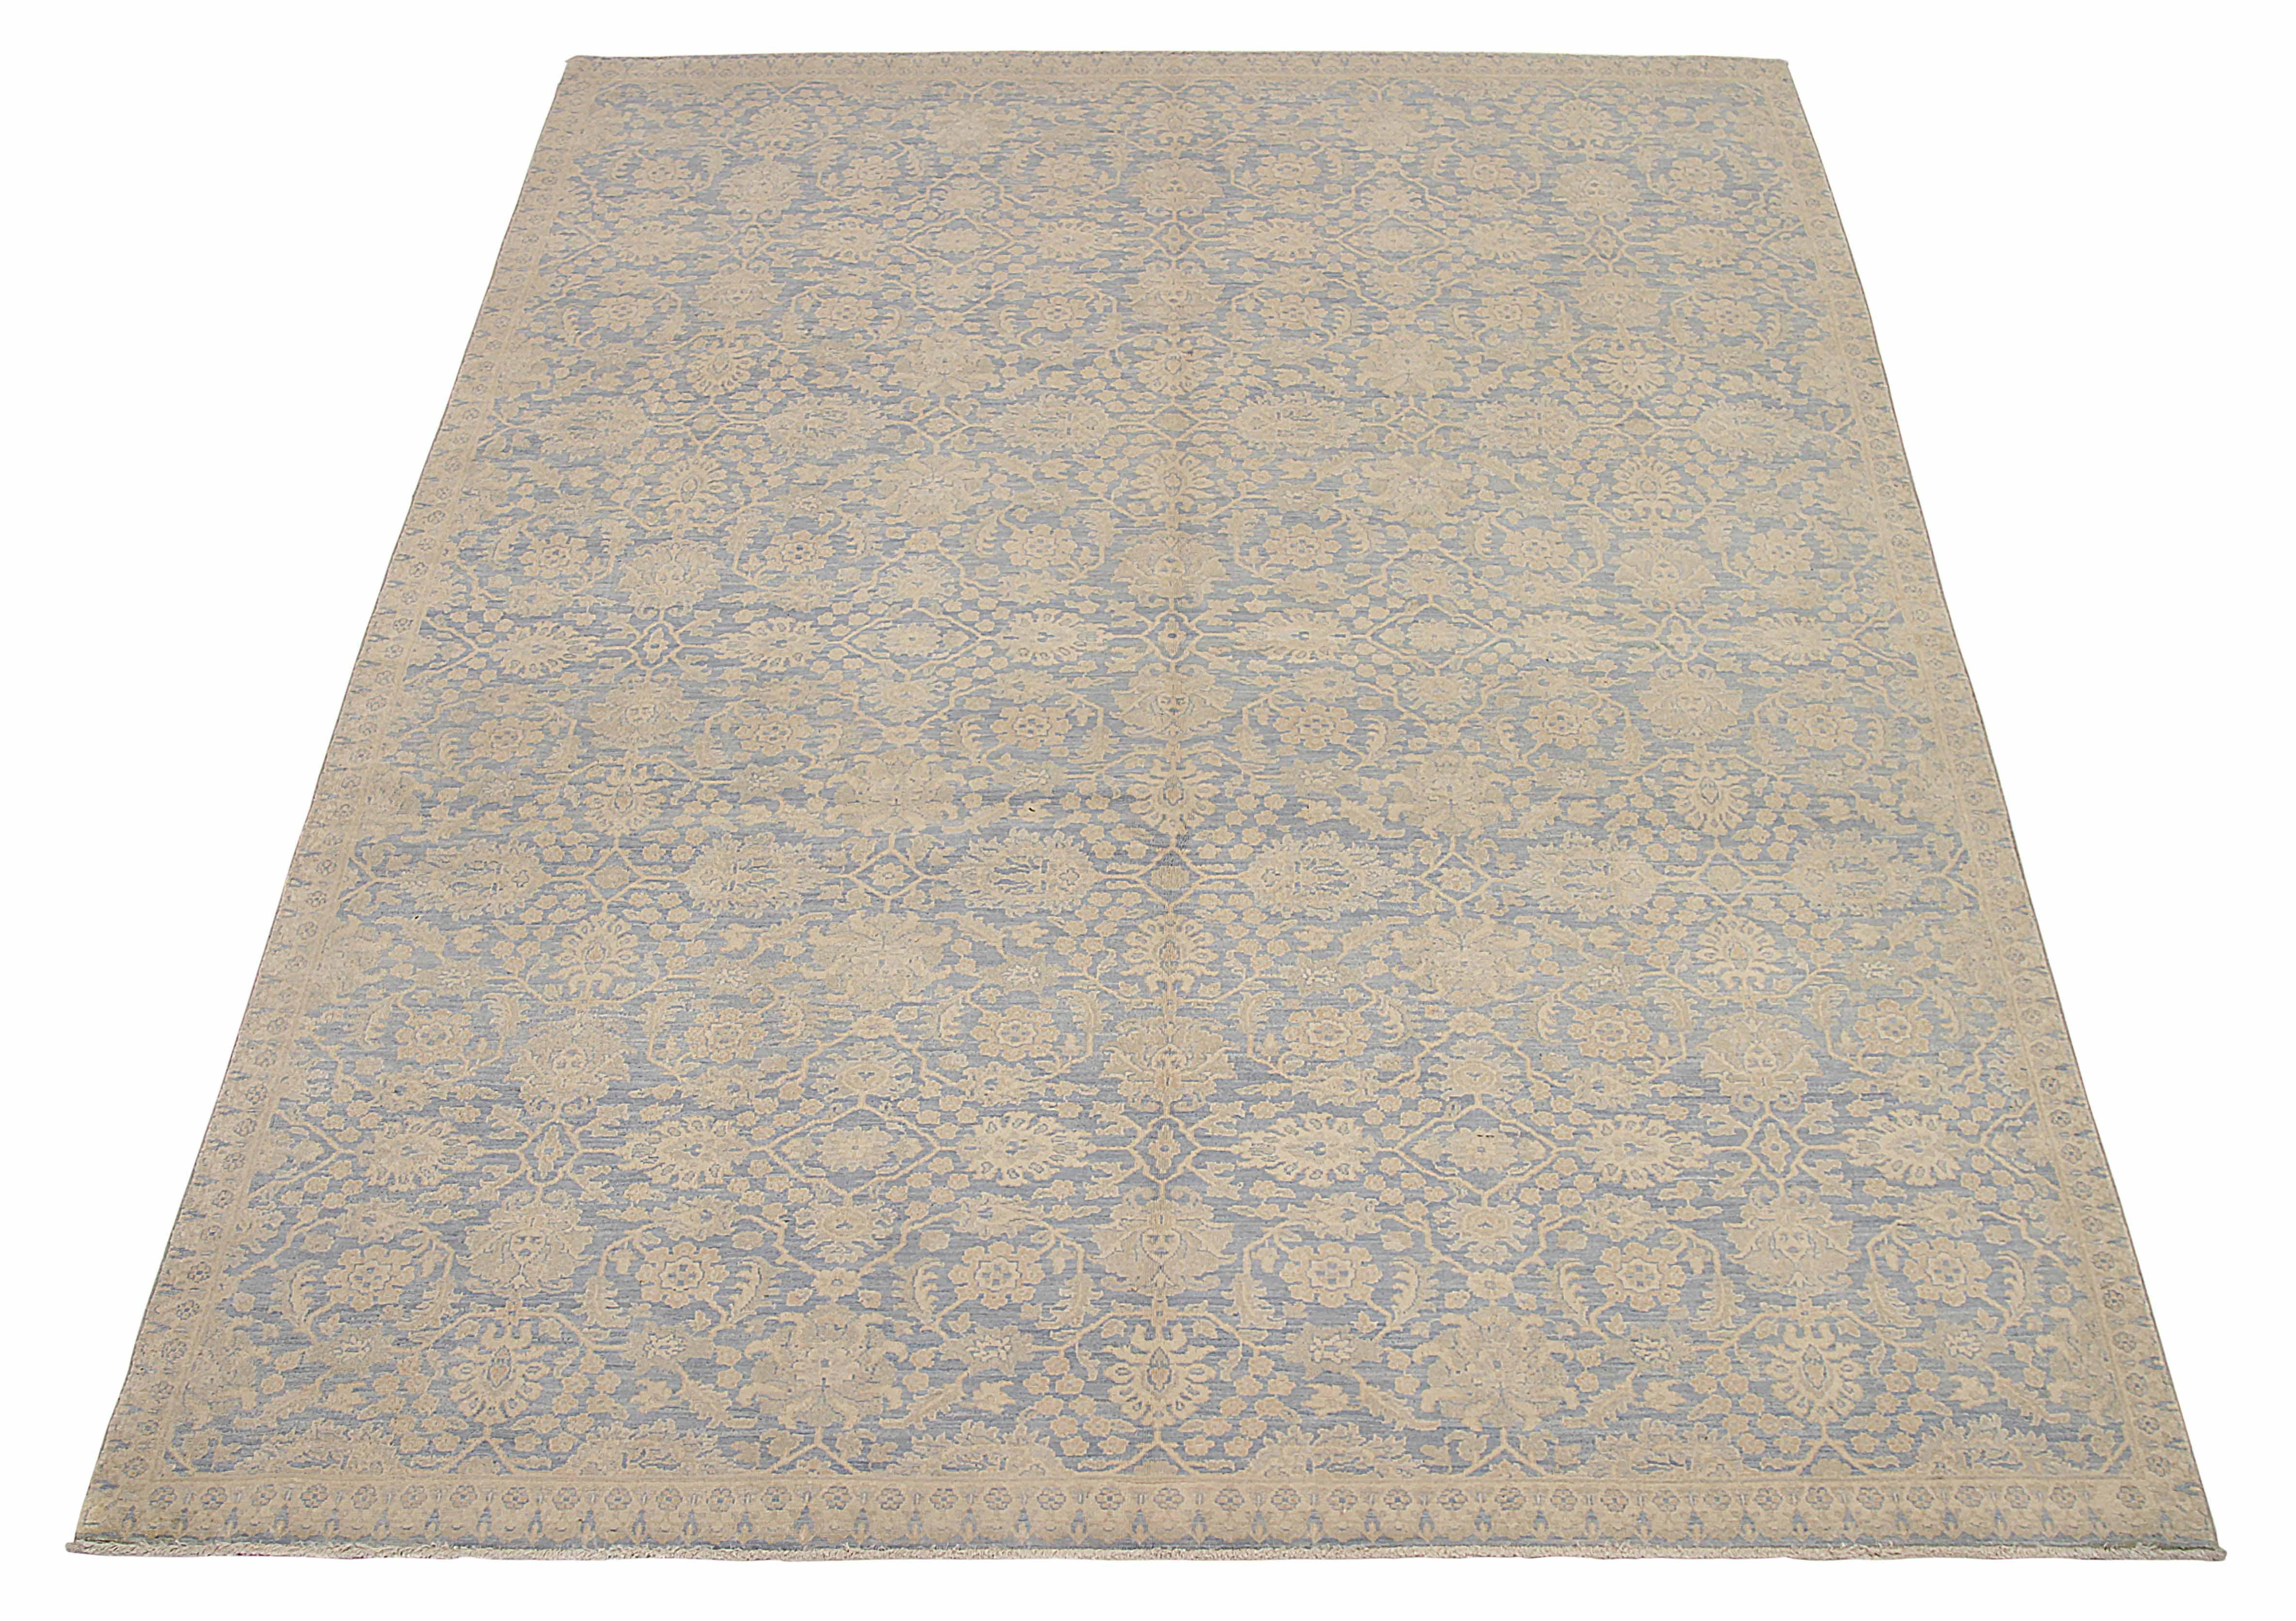 New Afghan area rug handwoven from the finest sheep’s wool. It’s colored with all-natural vegetable dyes that are safe for humans and pets. It’s a traditional Tabriz design handwoven by expert artisans. It’s a lovely area rug that can be